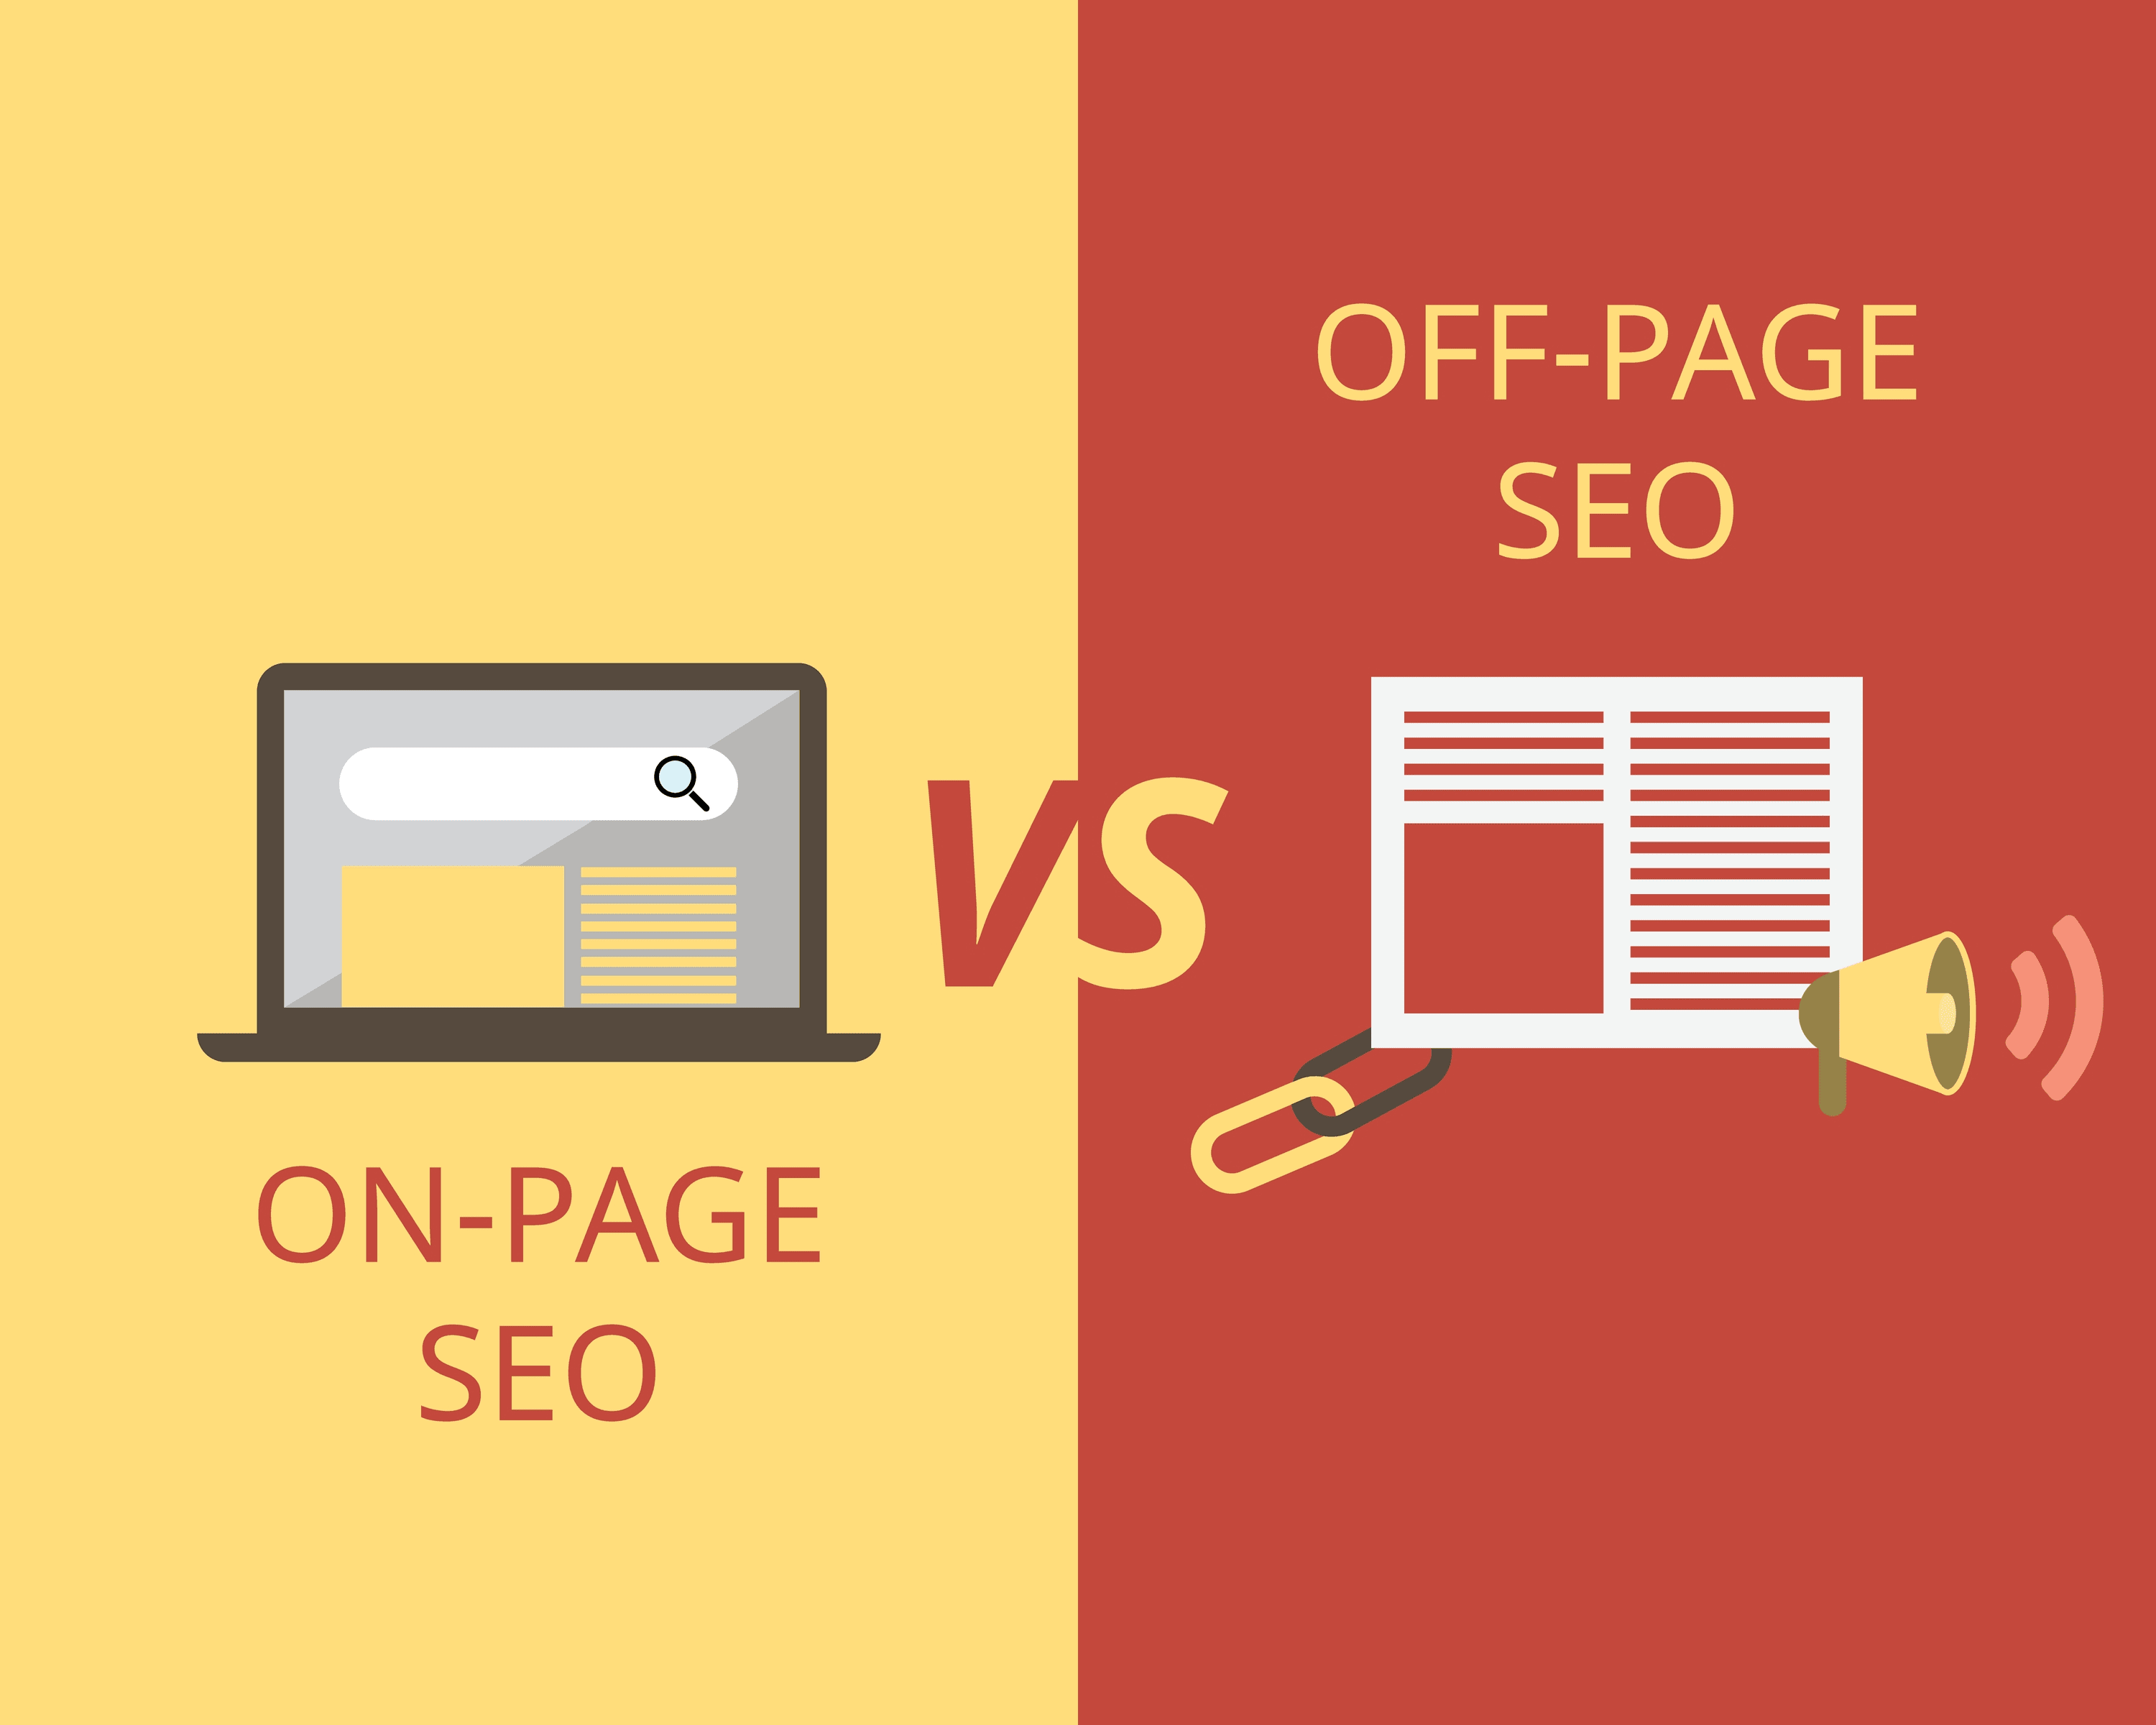 seo on and off page_on-page SEO compare to off-page SEO to help in search engine optimization